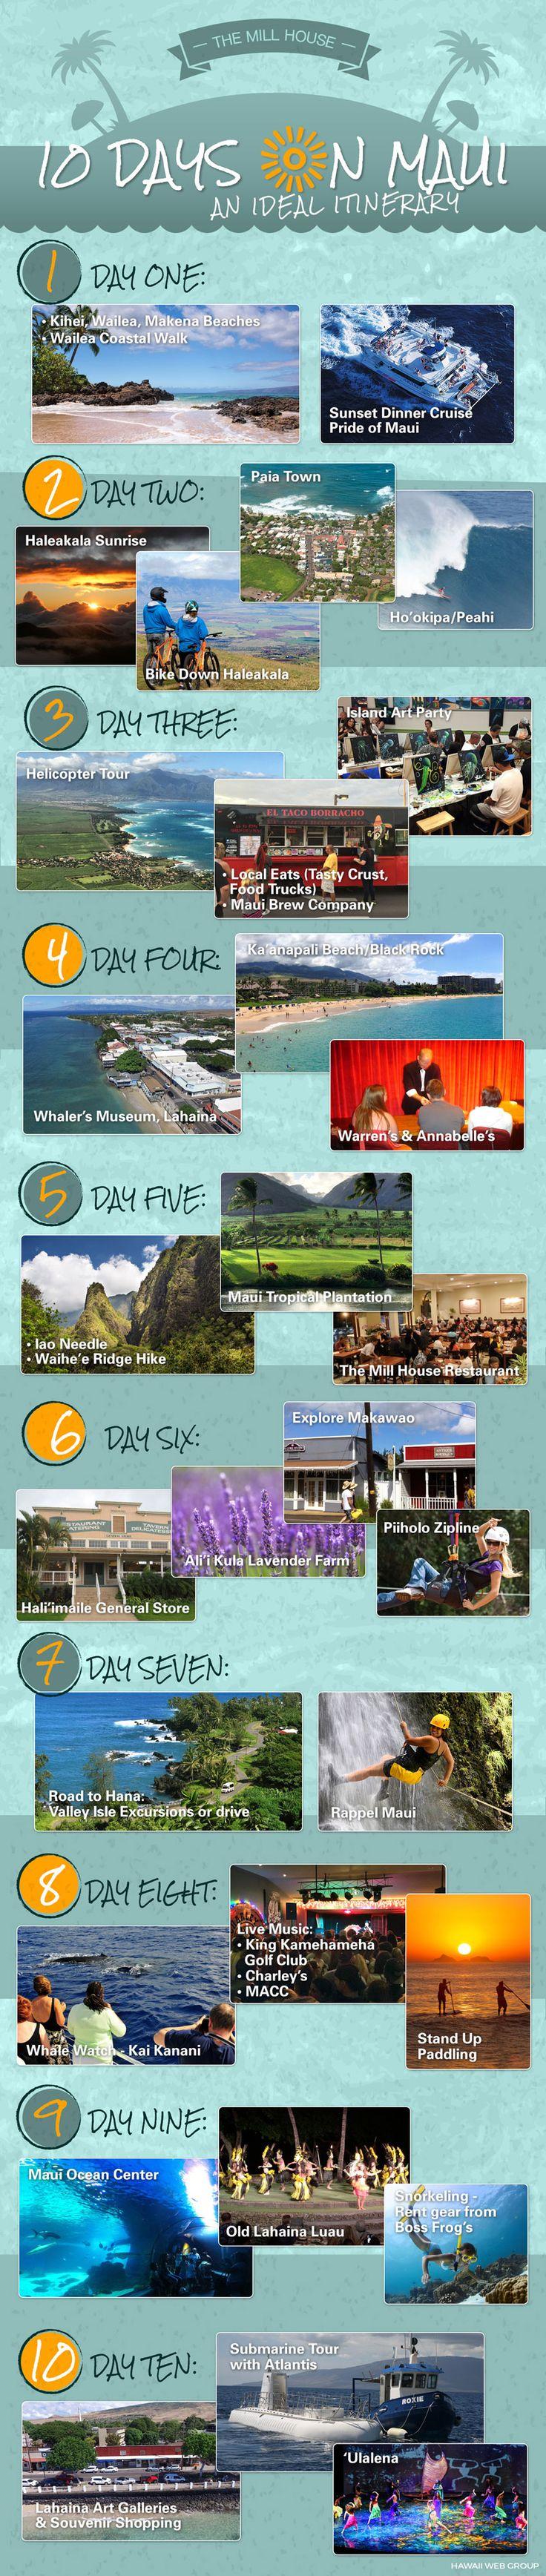 Hochzeit - 10 Day Maui Itinerary - Each Days Fun Outlined